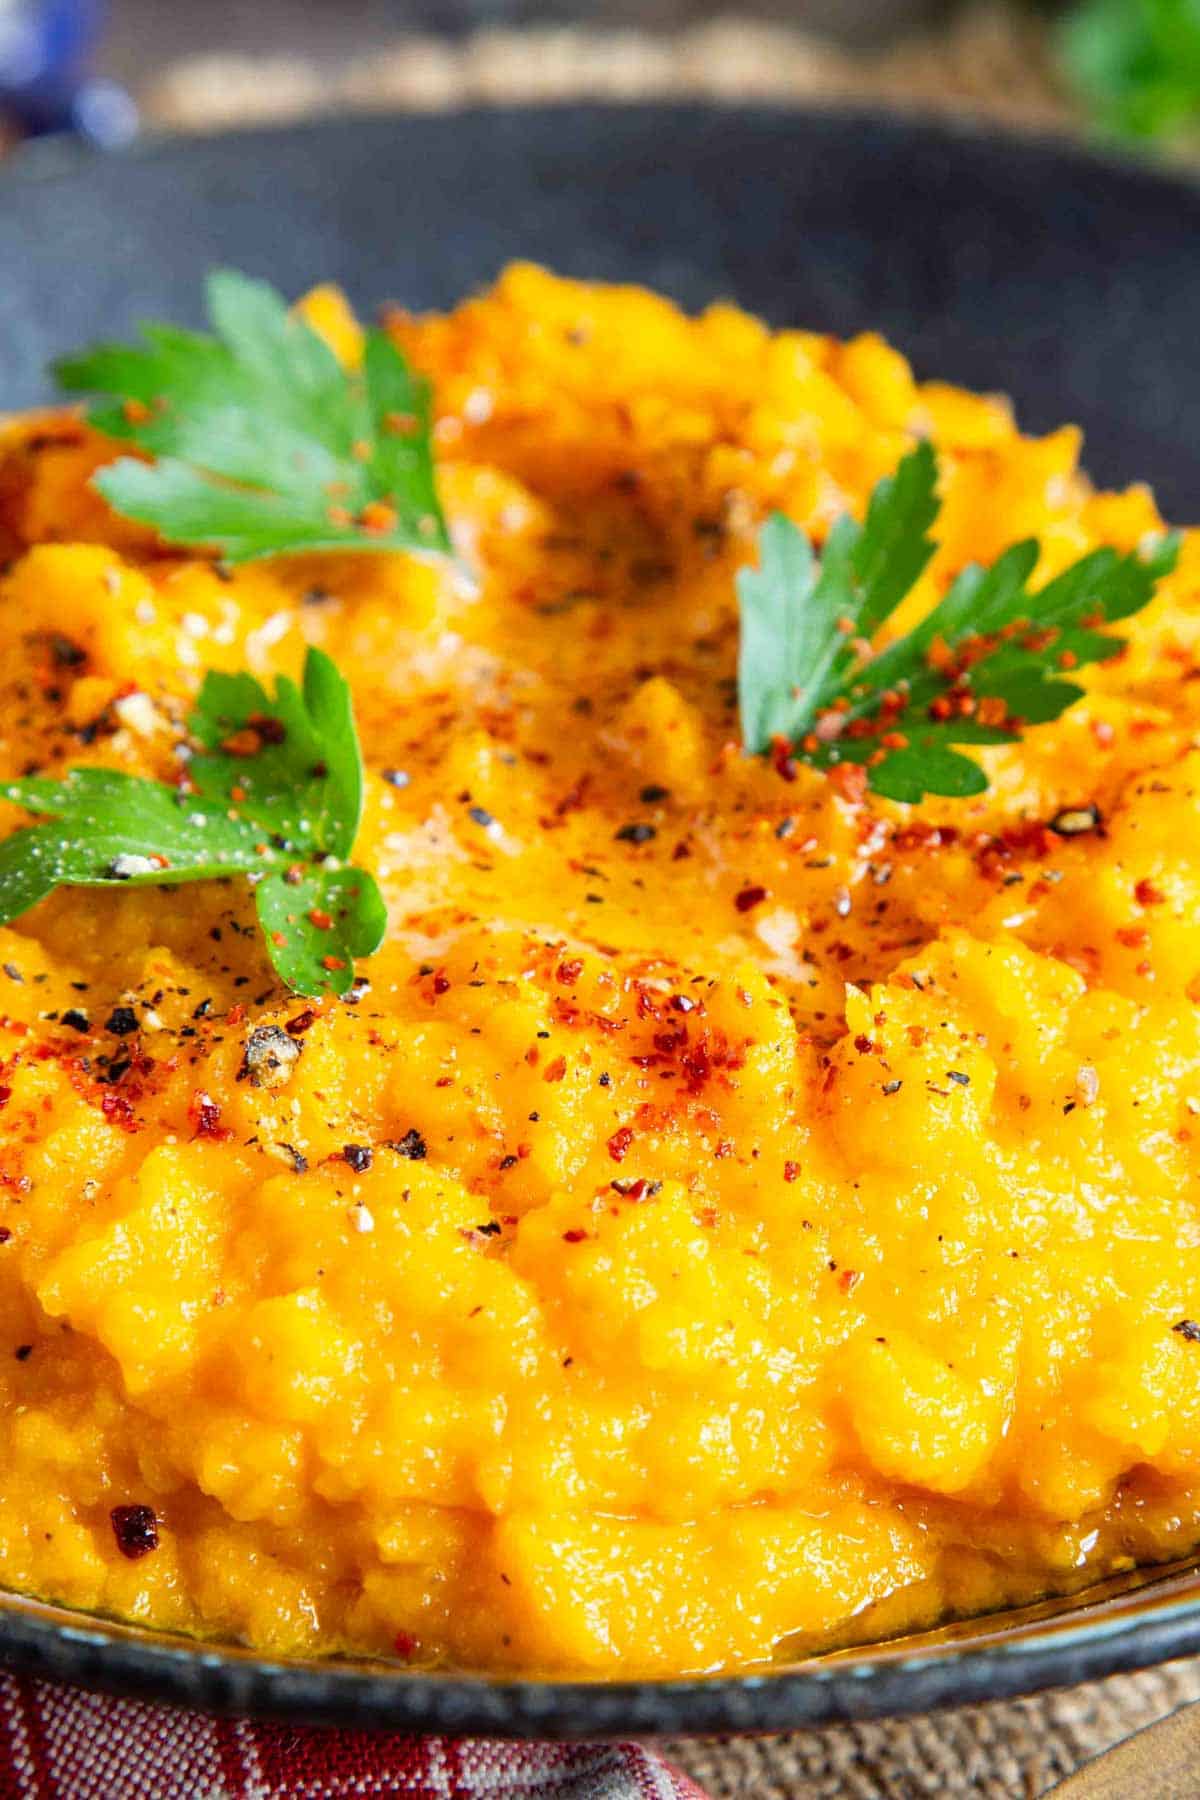 Close up shot of deliciously smooth carrot and swede mash, garnished with parsley and paprika.